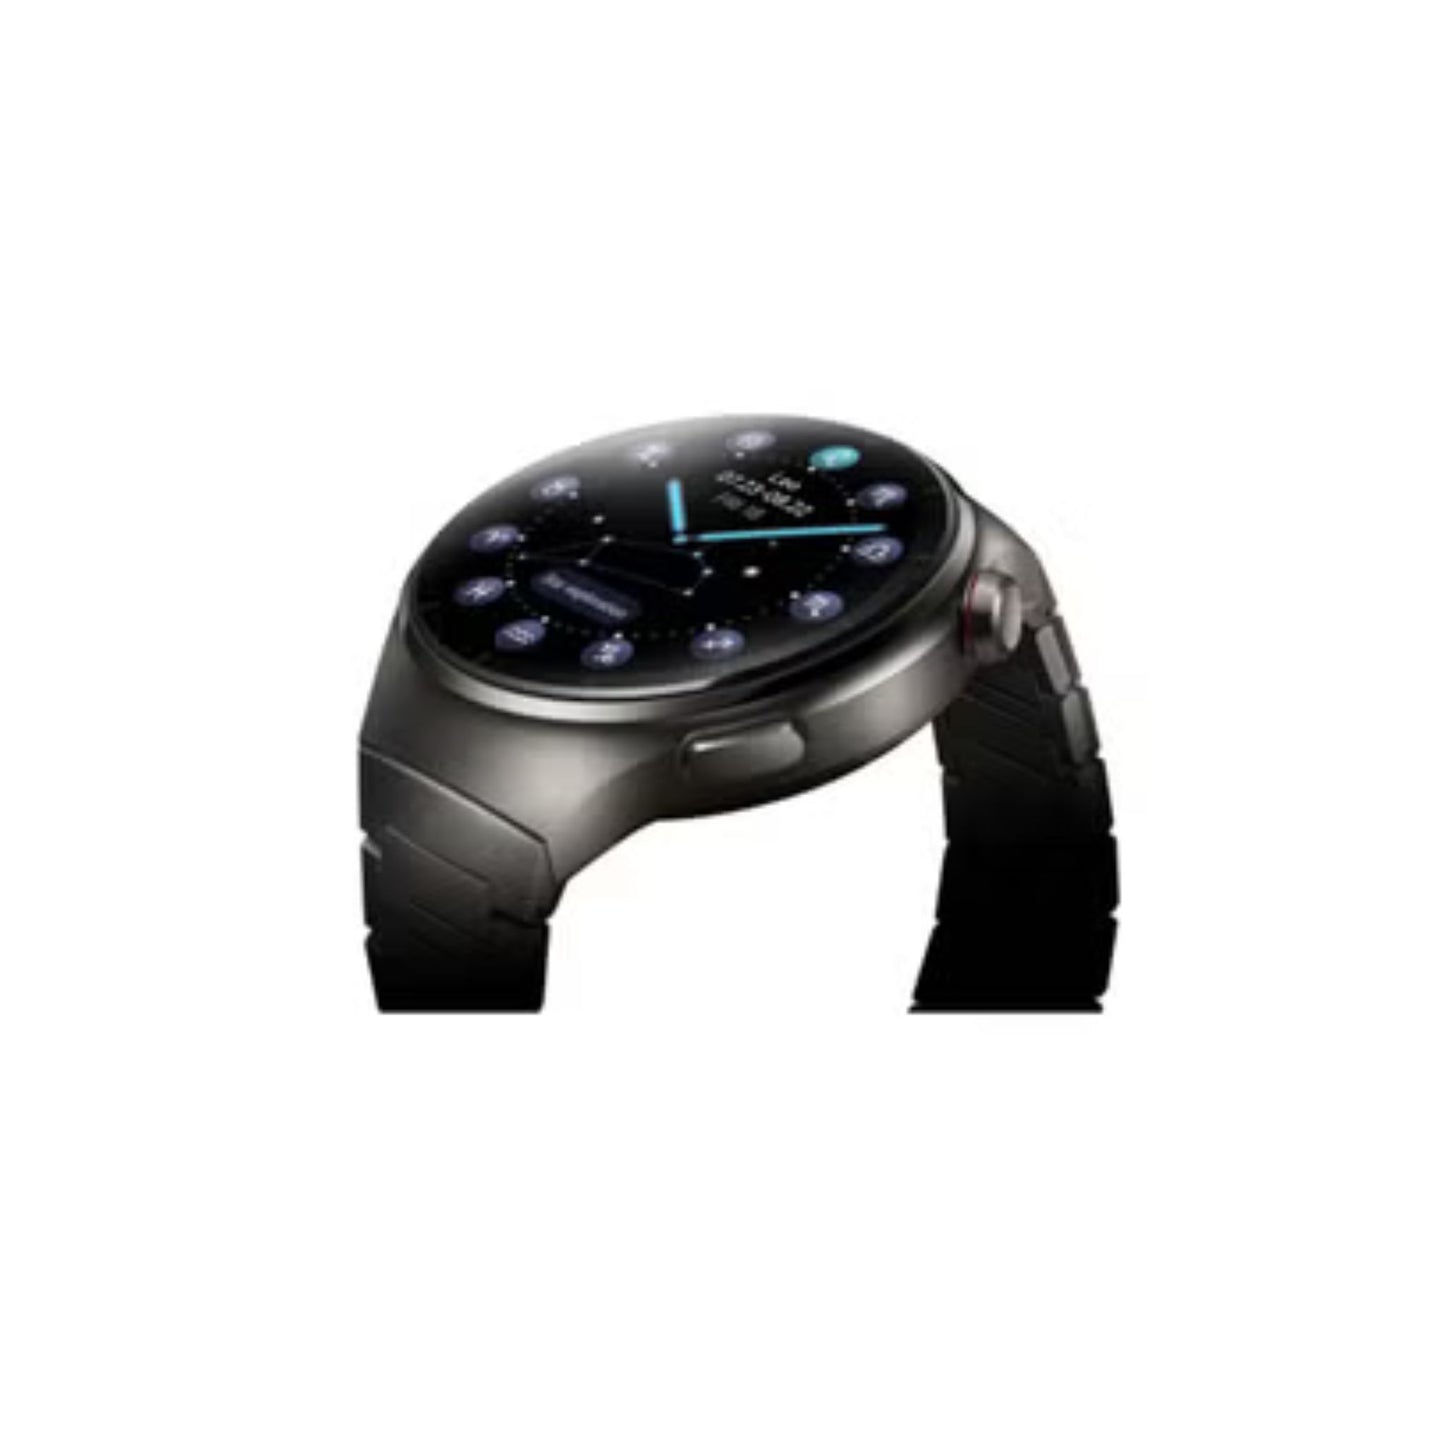 Haino Teko RW-32 Smart Watch_AMOLED_Carved Glass Display-Silicone + Stainless Steel 3 Strap,Bluetooth_Black